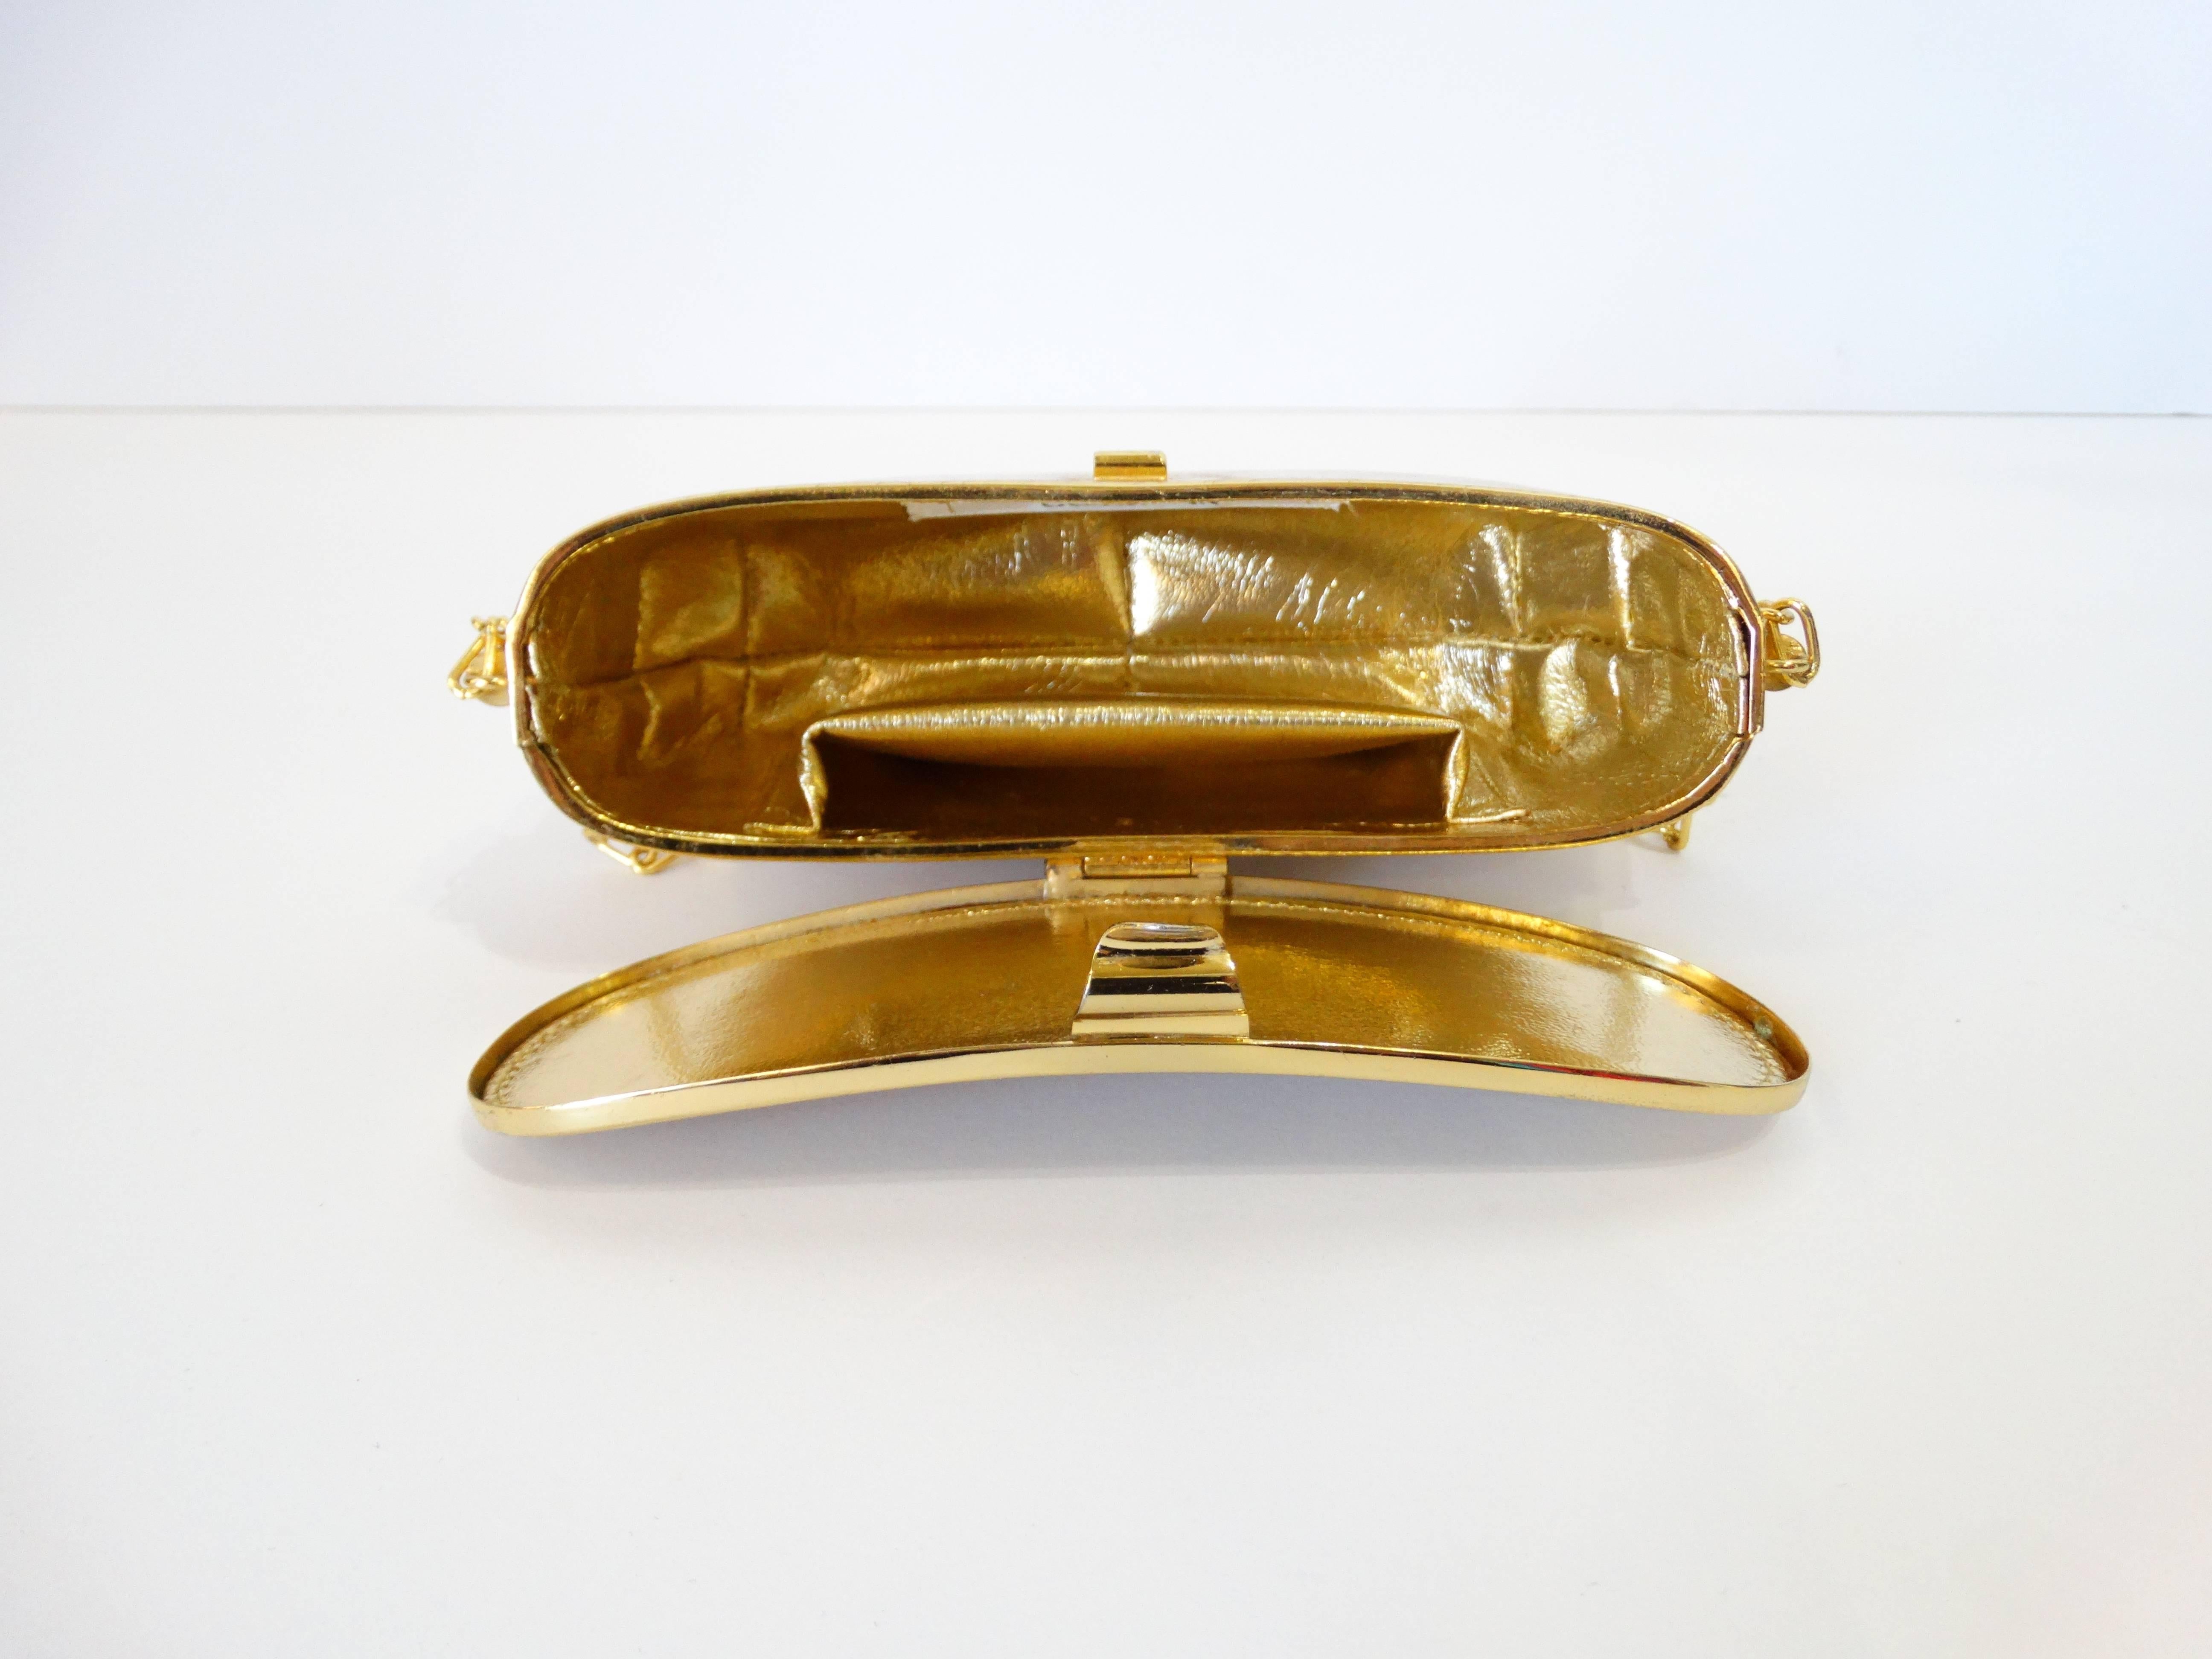 Classic brushed gold metal bean shape clutch by Rodo for Bergdorf Goodman Made in Italy.  Perfect evening bag with metallic gold lining in gold leather. The strap has a 22